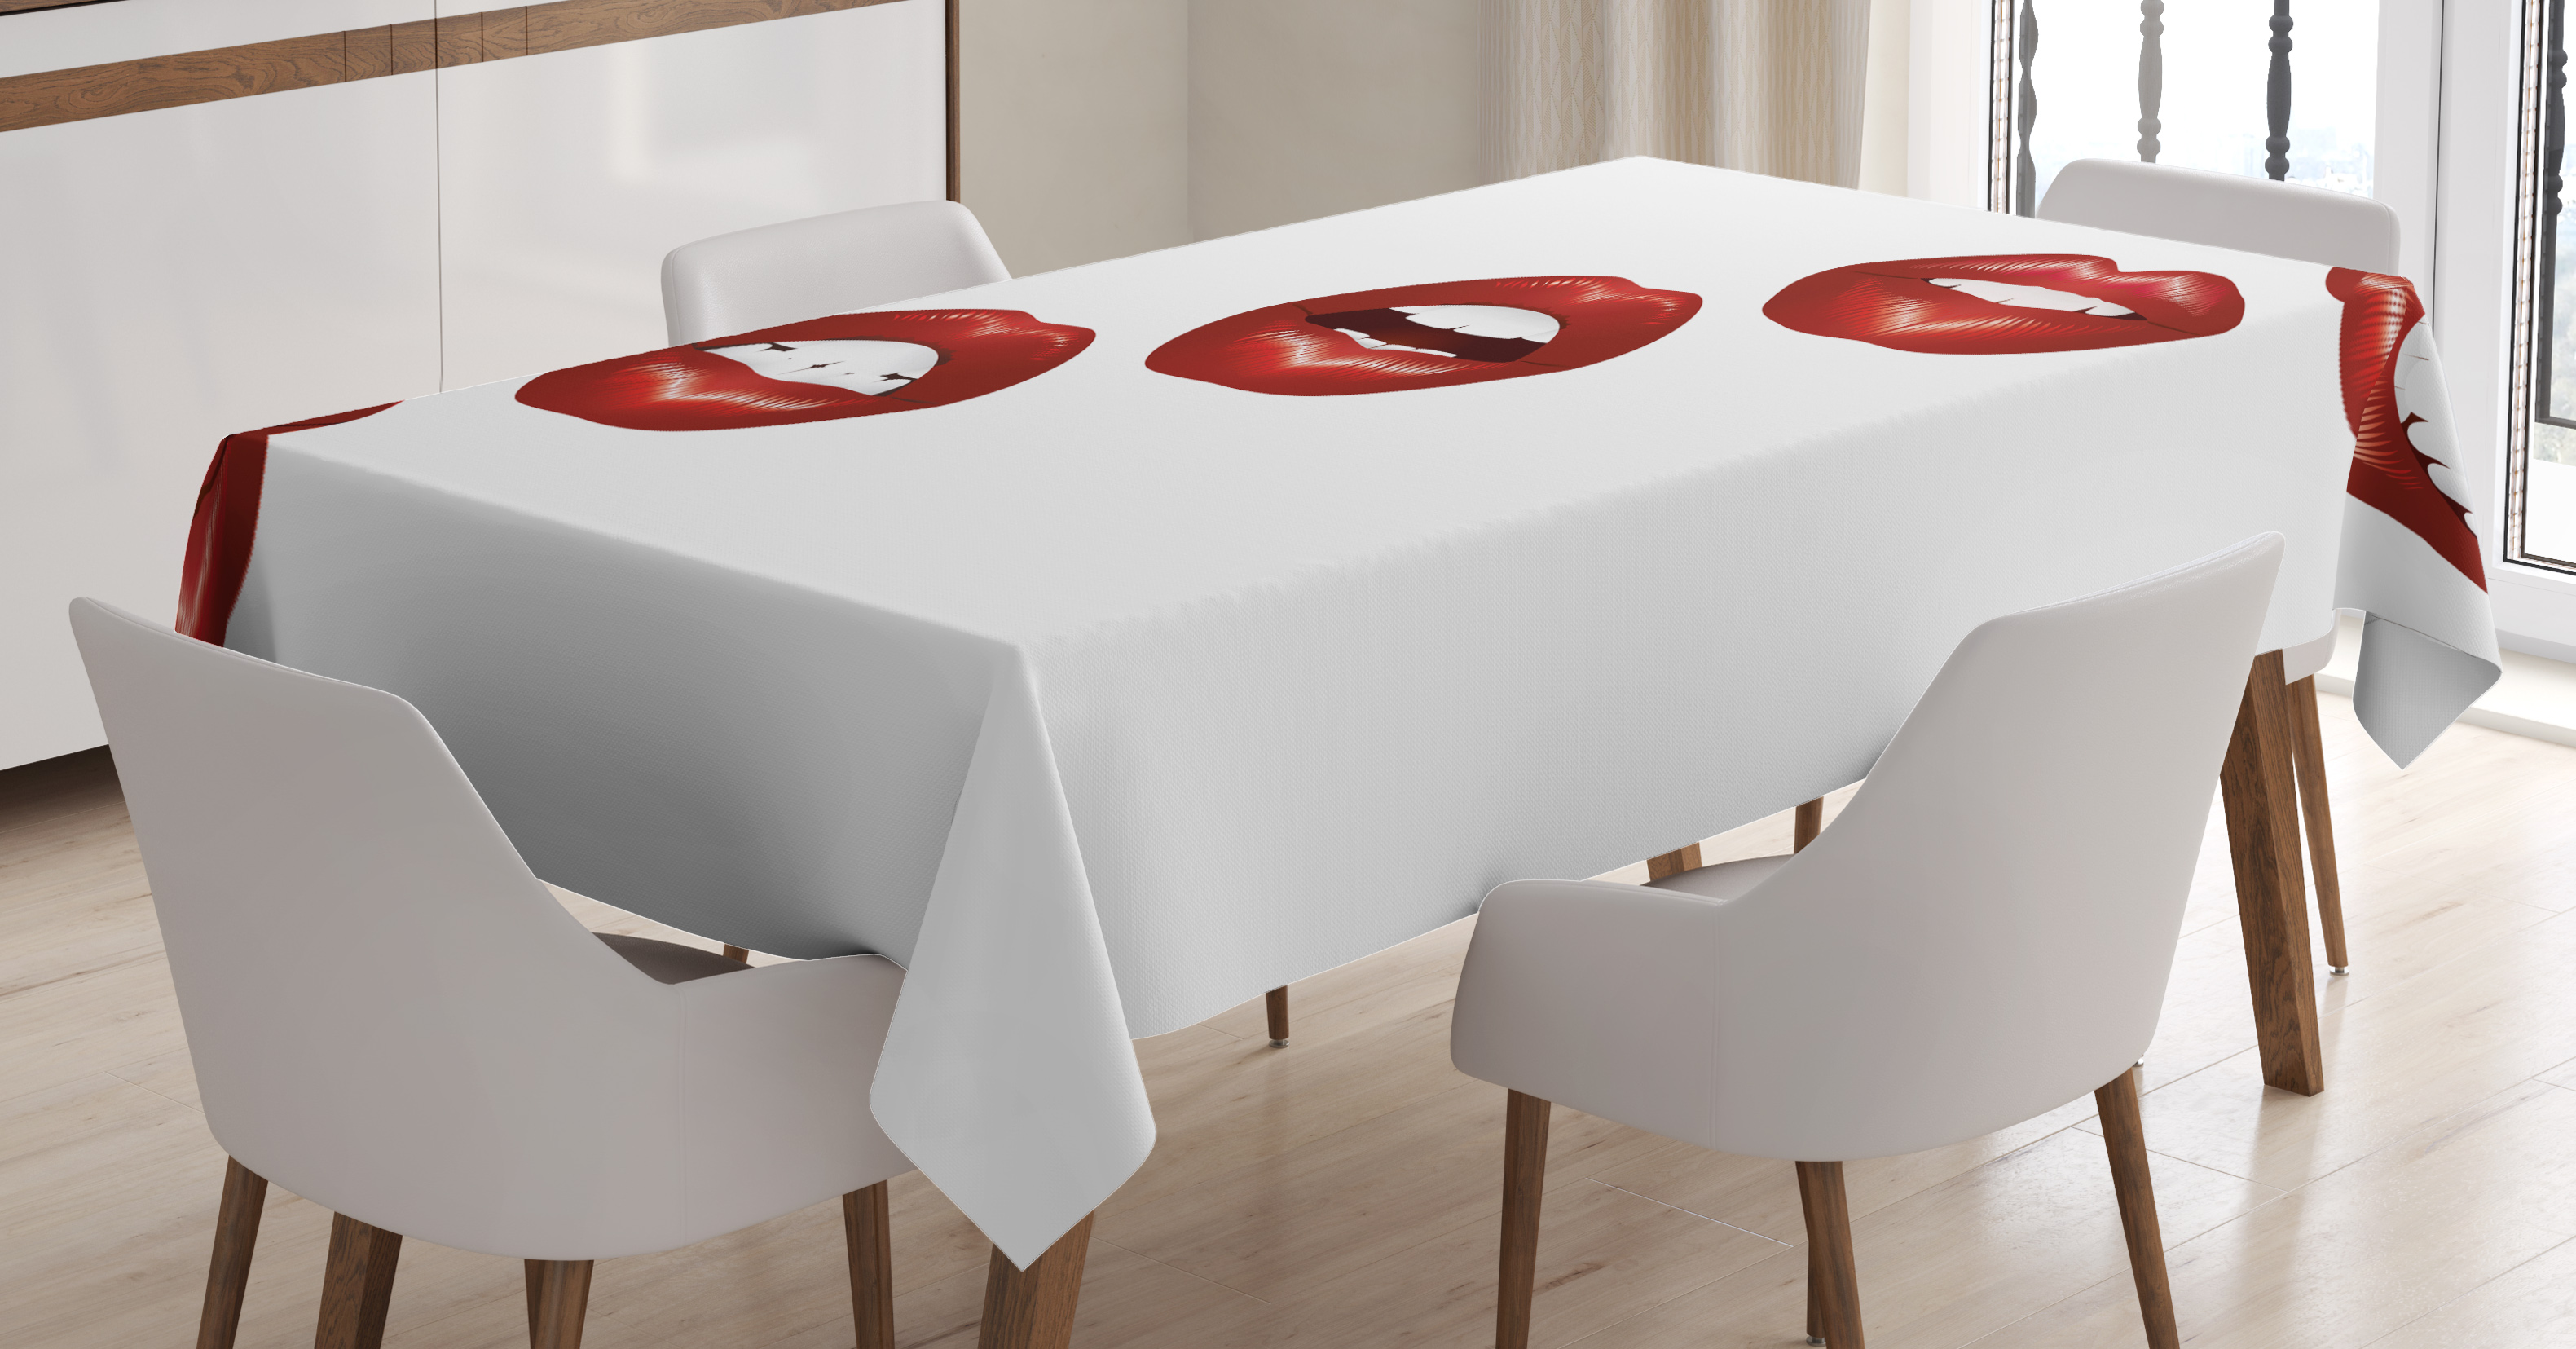 Kiss Tablecloth, Vivid Full Red Lips Smiling Kissing Sexy Lipstick ...